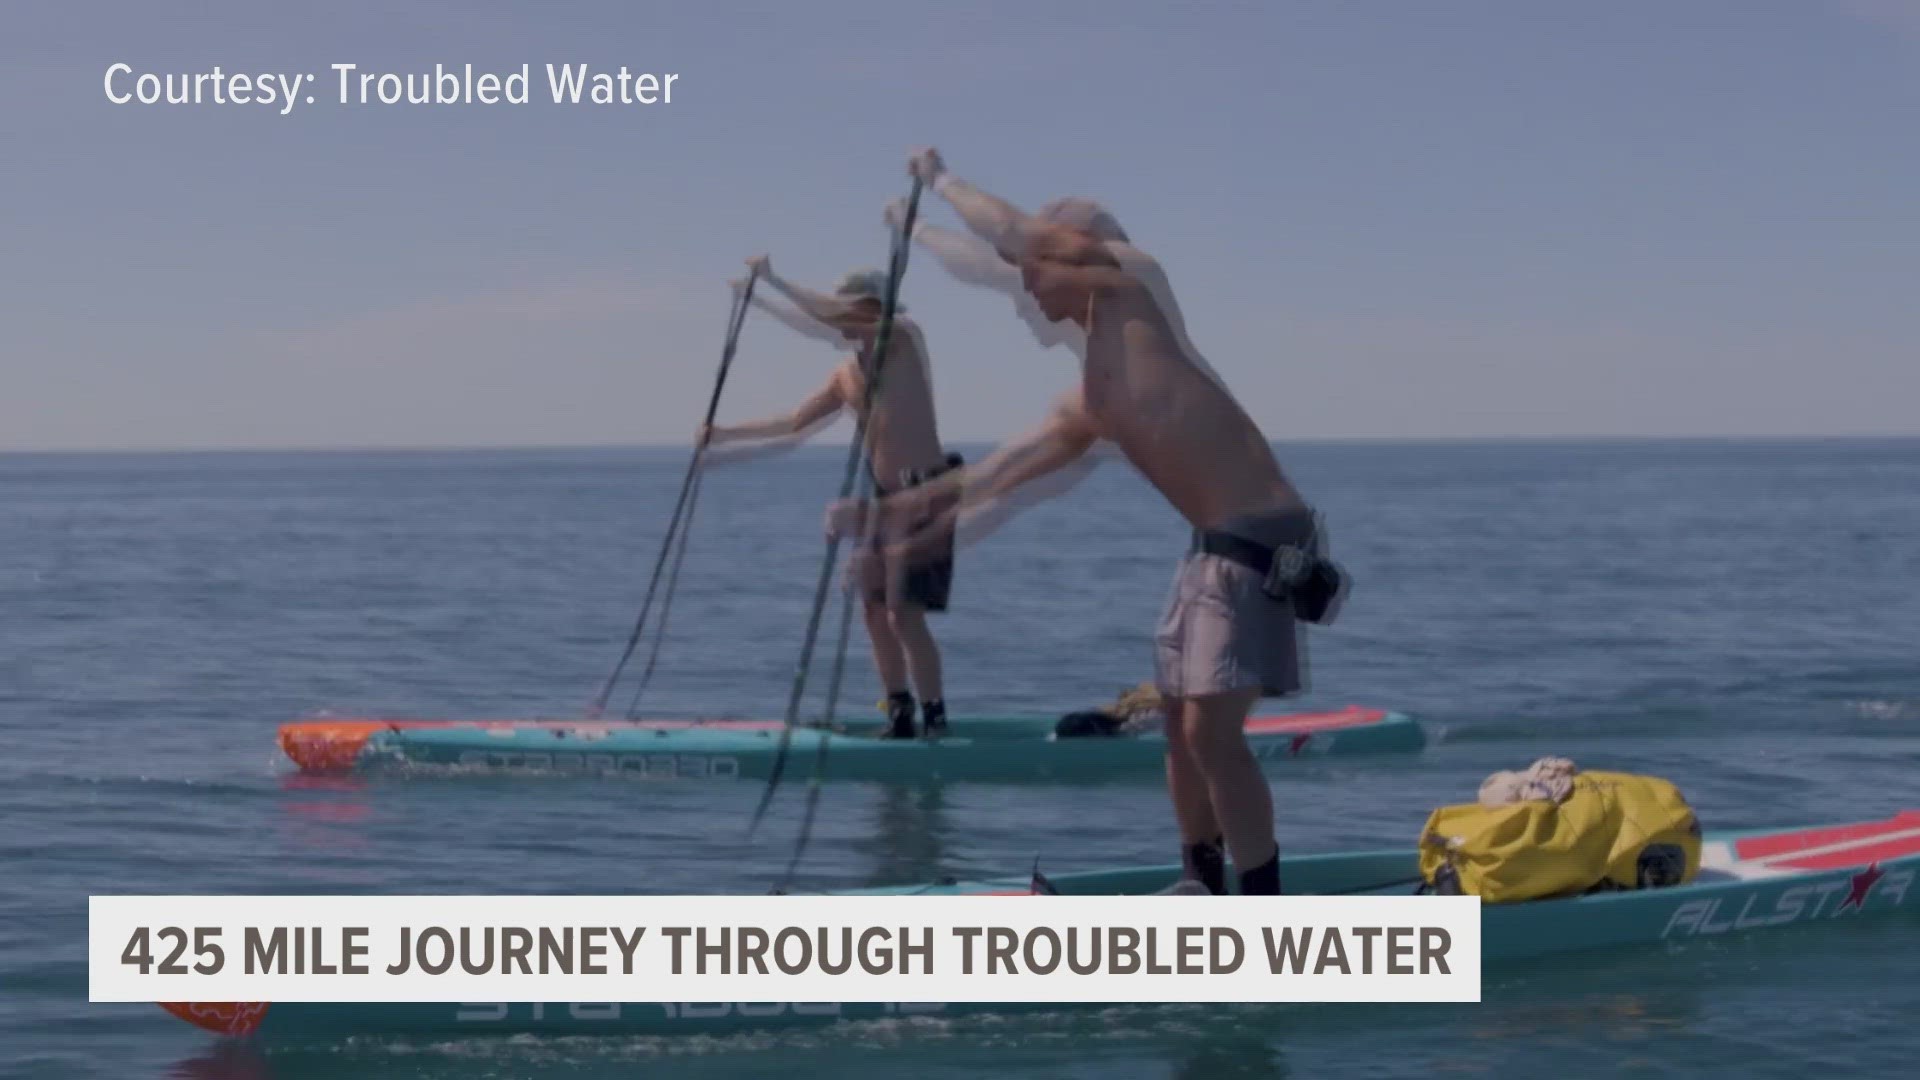 The documentary titled 'Troubled Water' premieres in Grand Rapids 2/1 at the Loosemore Auditorium at Grand Valley State University's campus.